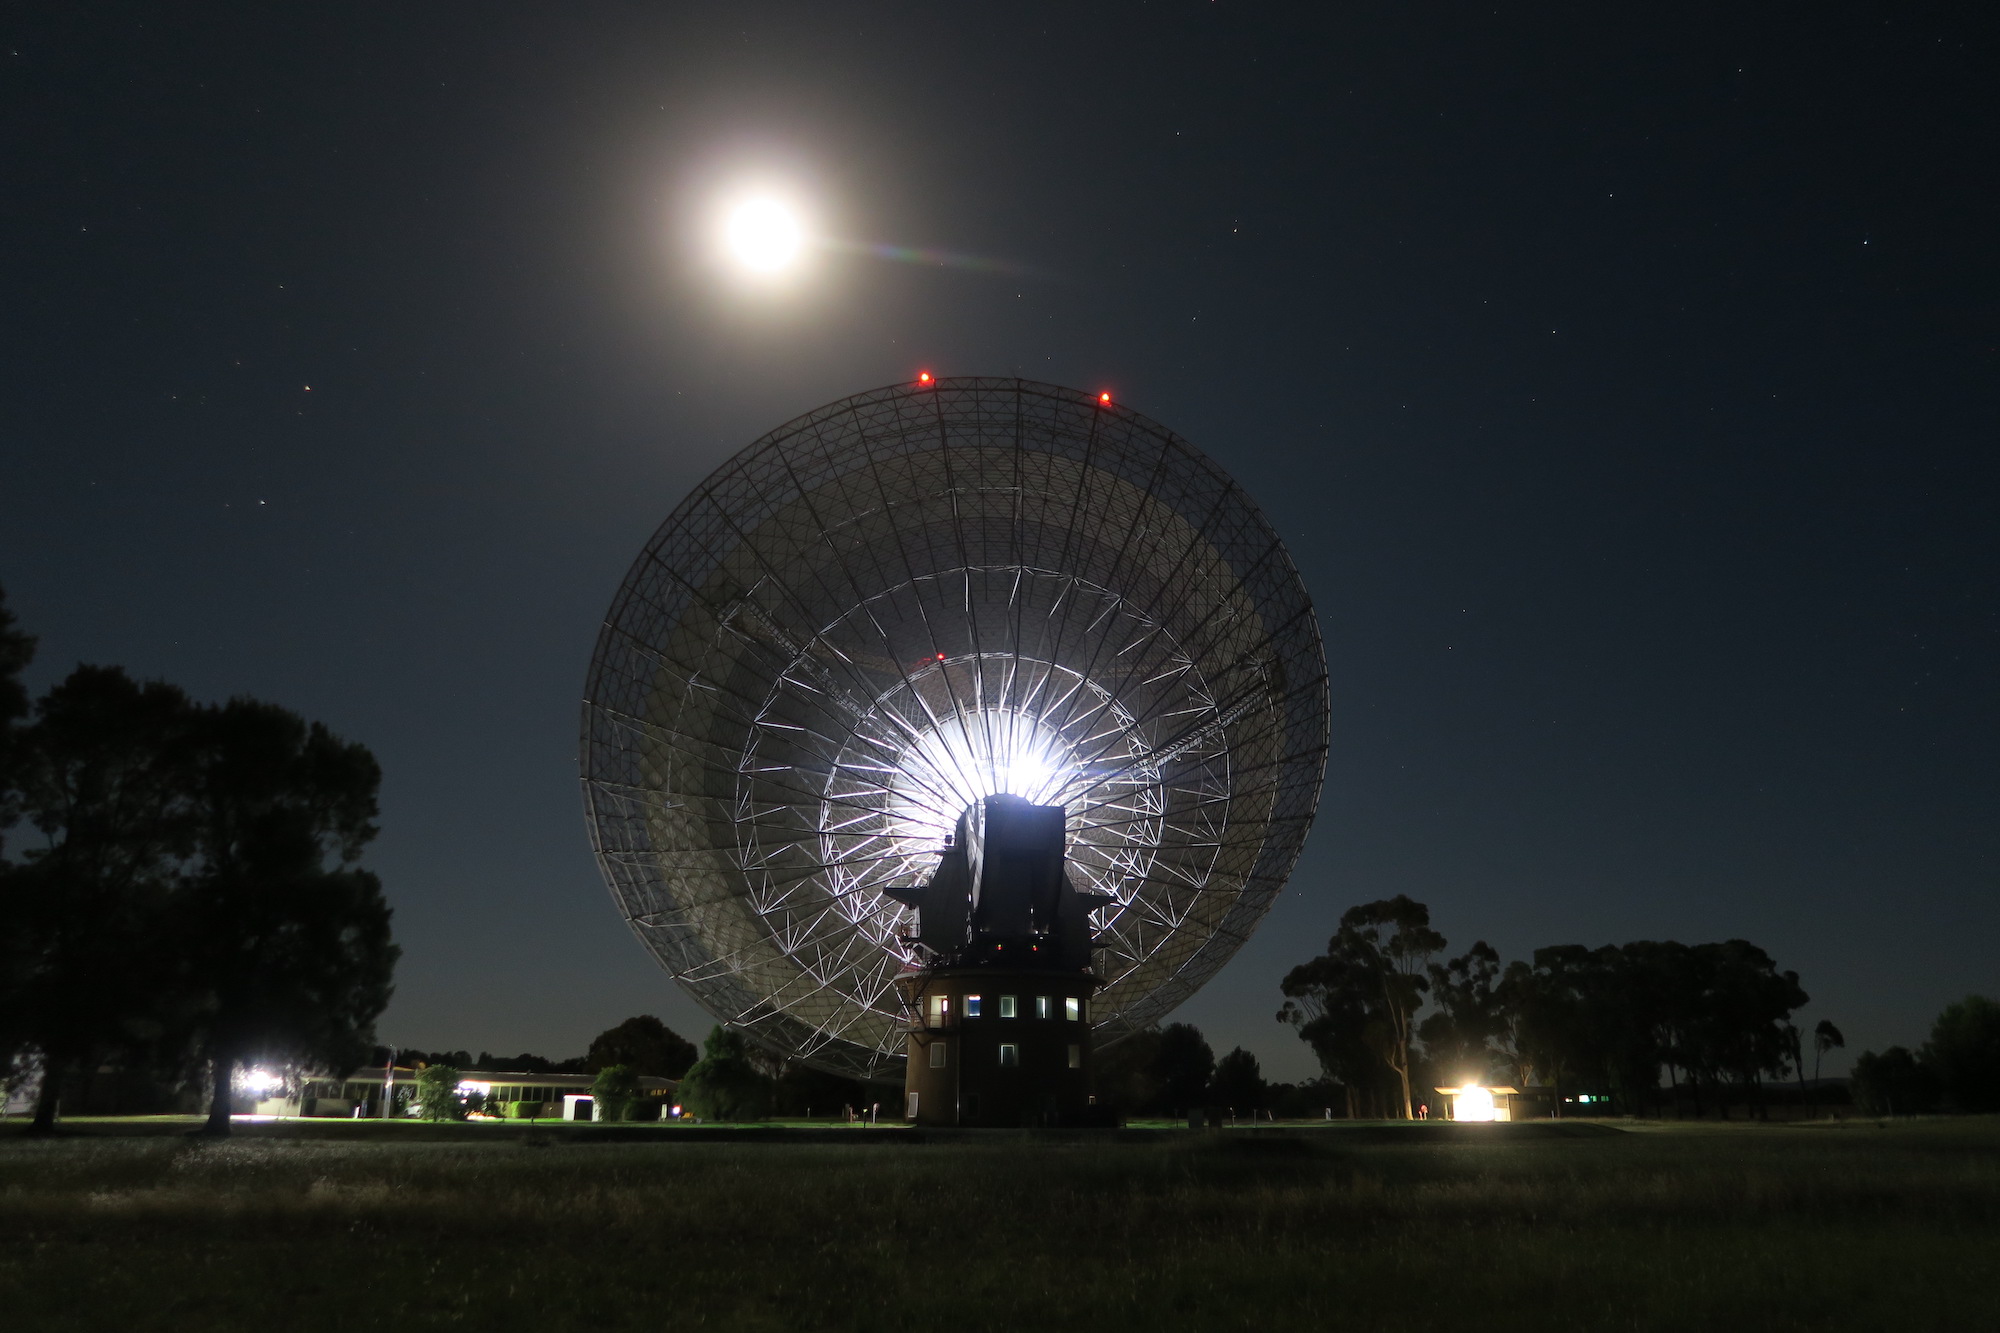 Murriyang, the Parkes 64m radio-telescope, pictured at night tracking the Odysseus lunar lander.